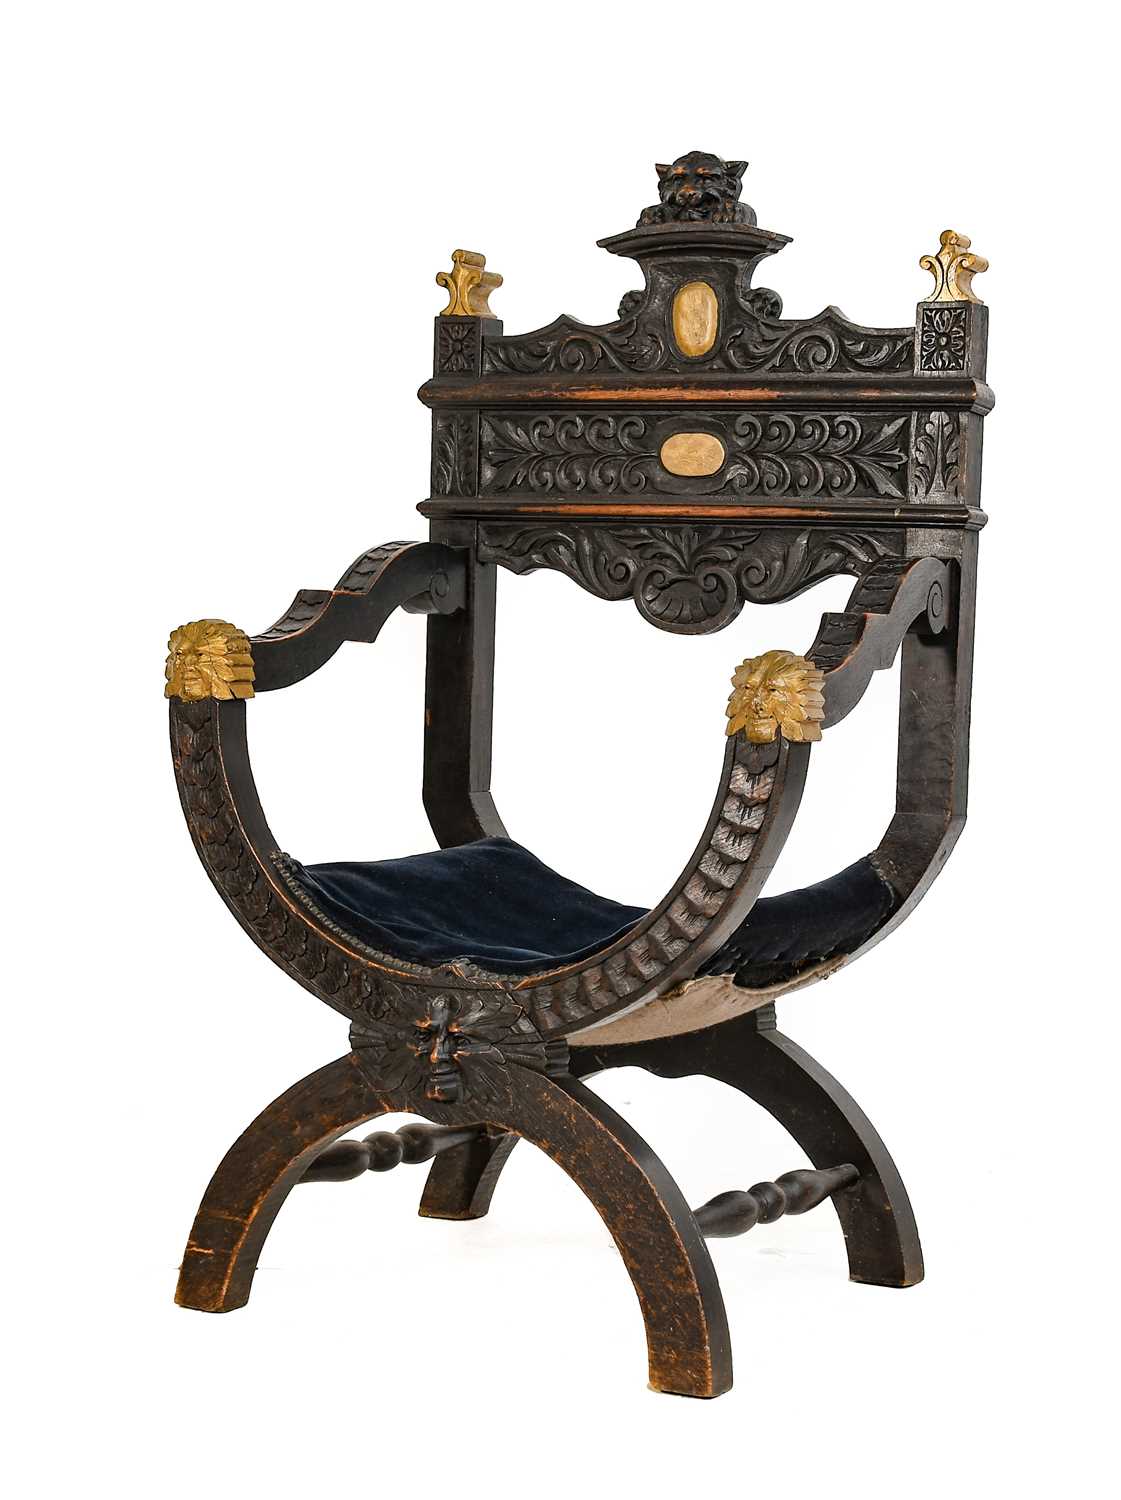 A Victorian Carved Oak and Parcel Gilt Savonarola Style Armchair, late 19th century, the carved back